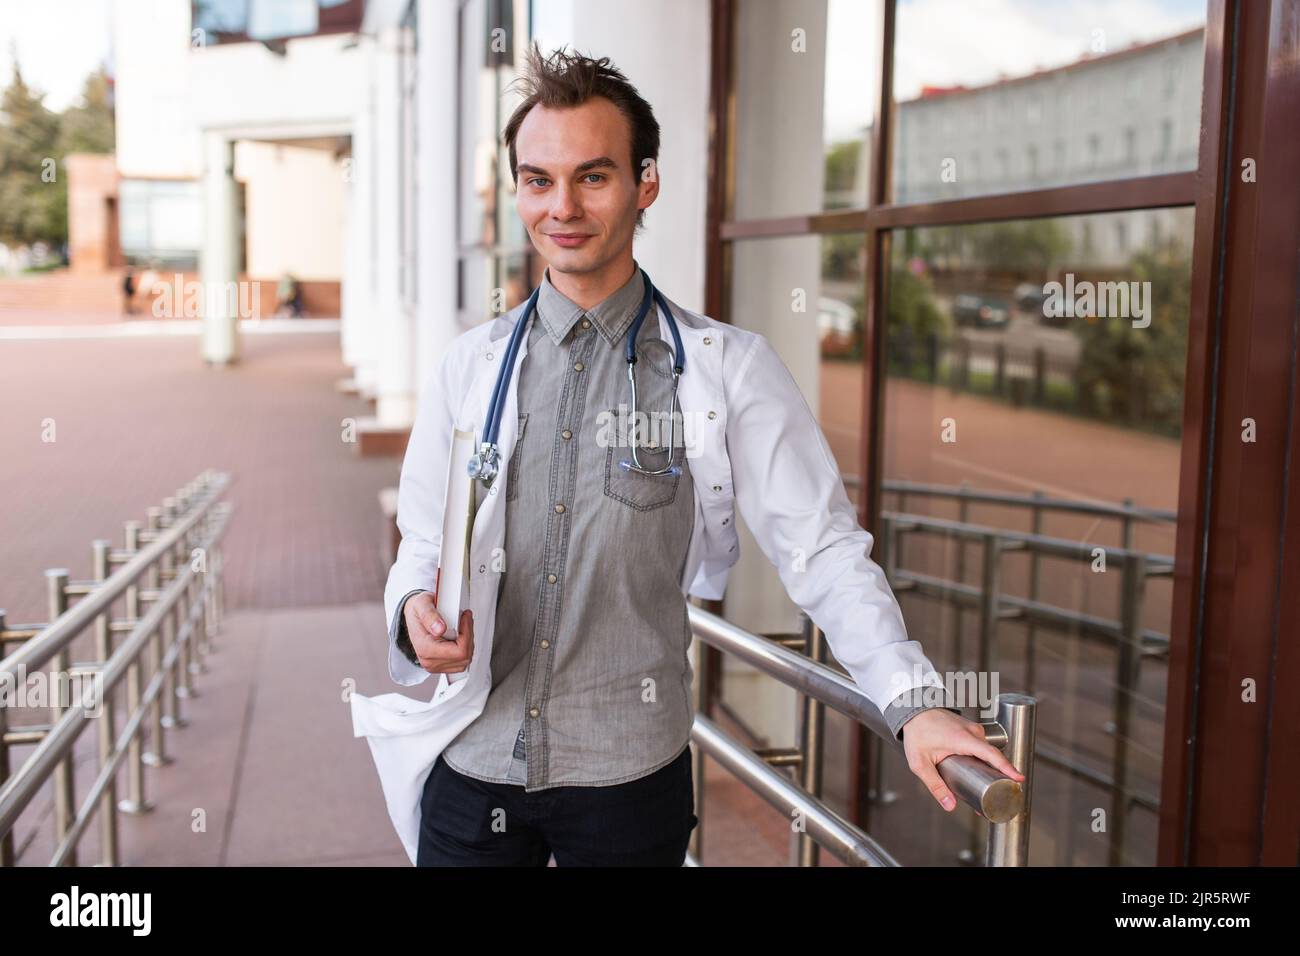 Portrait of a medical student on the threshold of a university clinic. The concept of modern education. Stock Photo